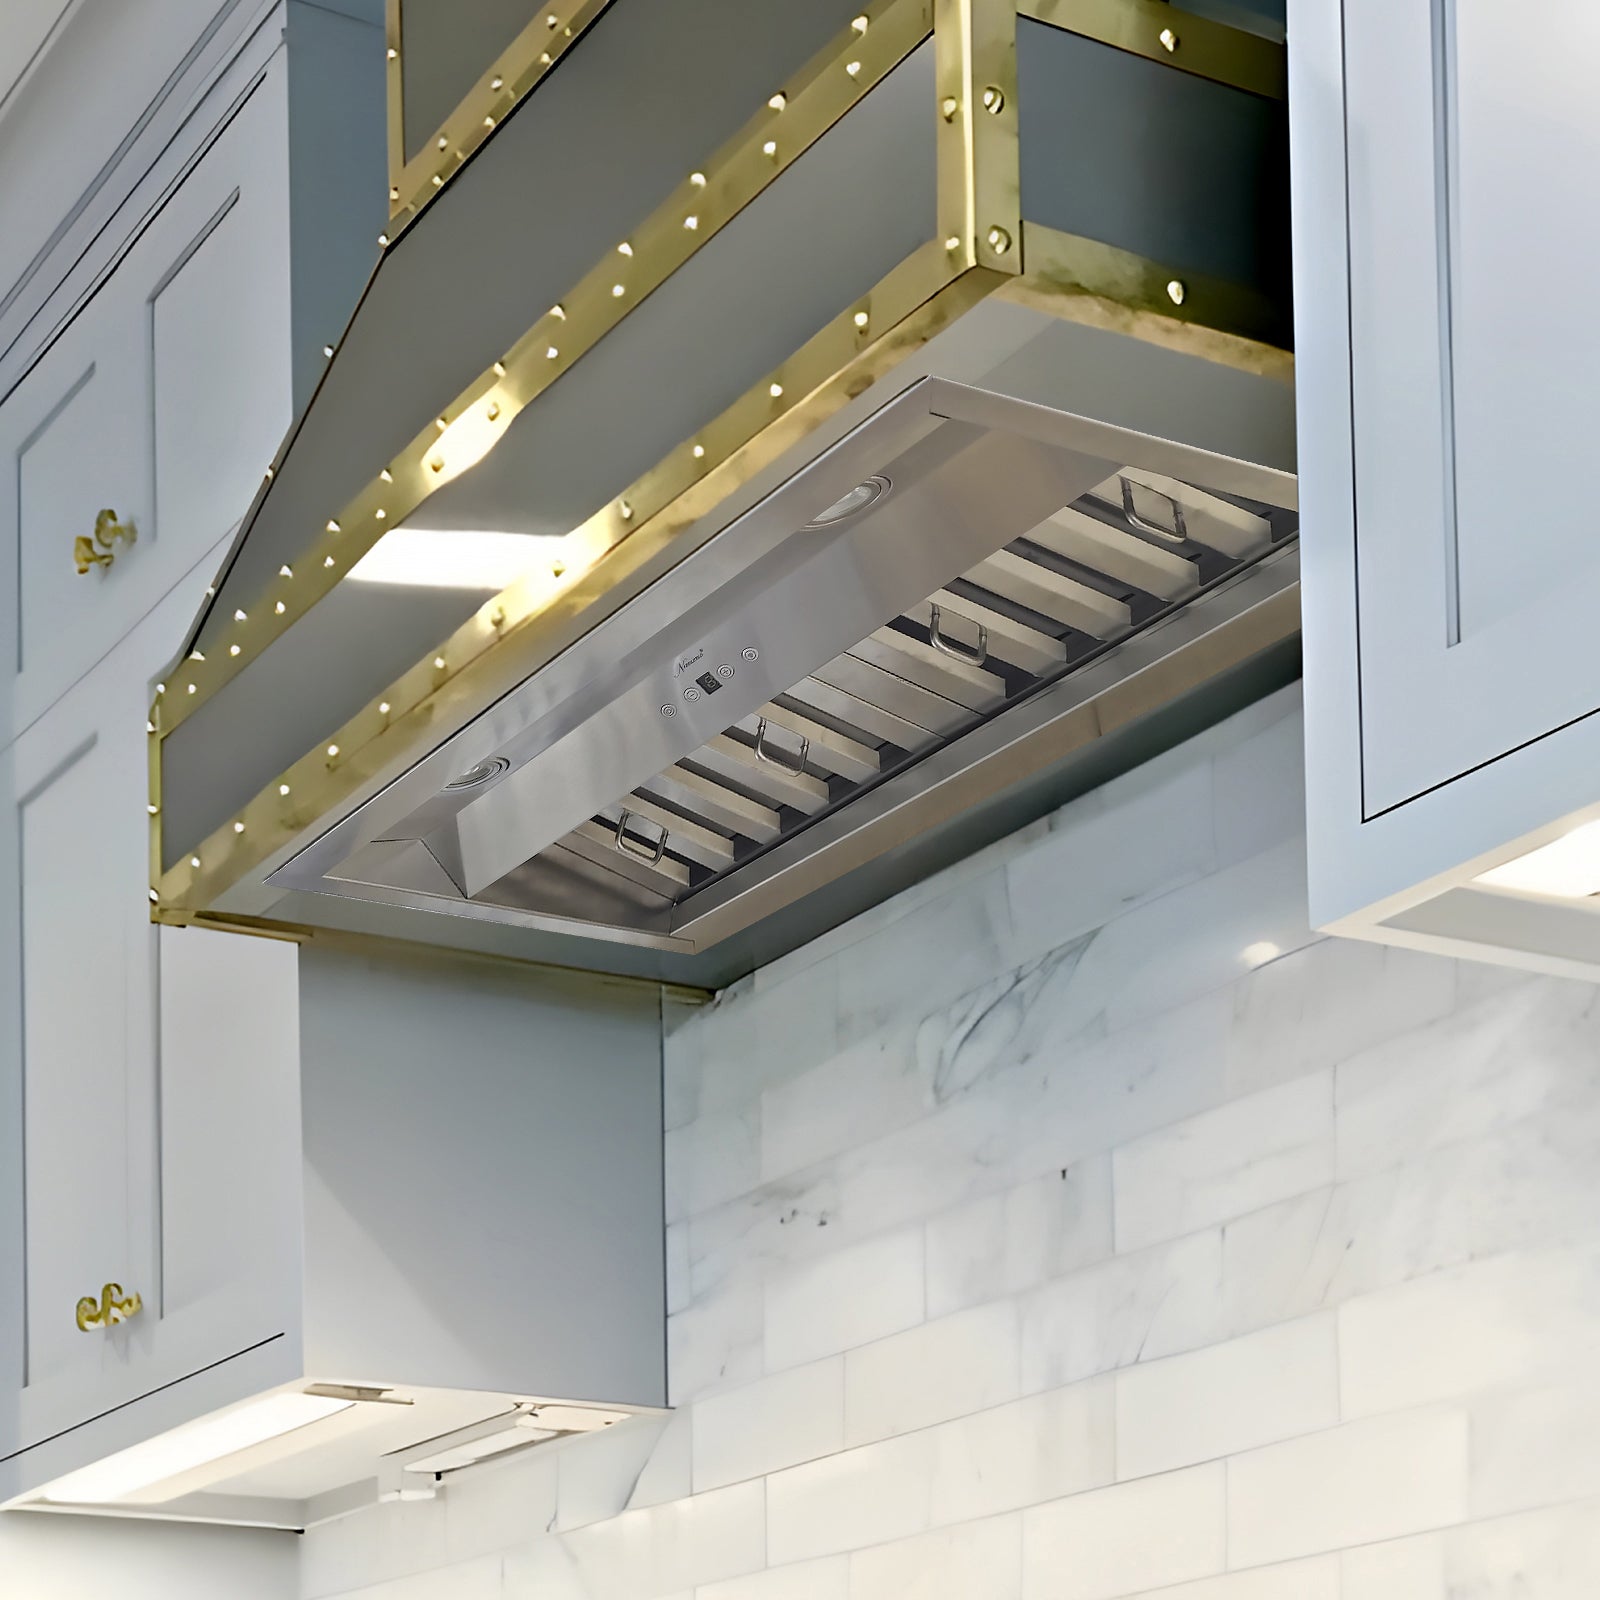 Range Hood Insert 30 Inch, Ultra Quiet, Powerful Suction Built-in Kitchen Vent Hood, Stainless Steel Ducted Stove Hood with Dimmable LED Lights Warm White, 3-Speeds 600CFM